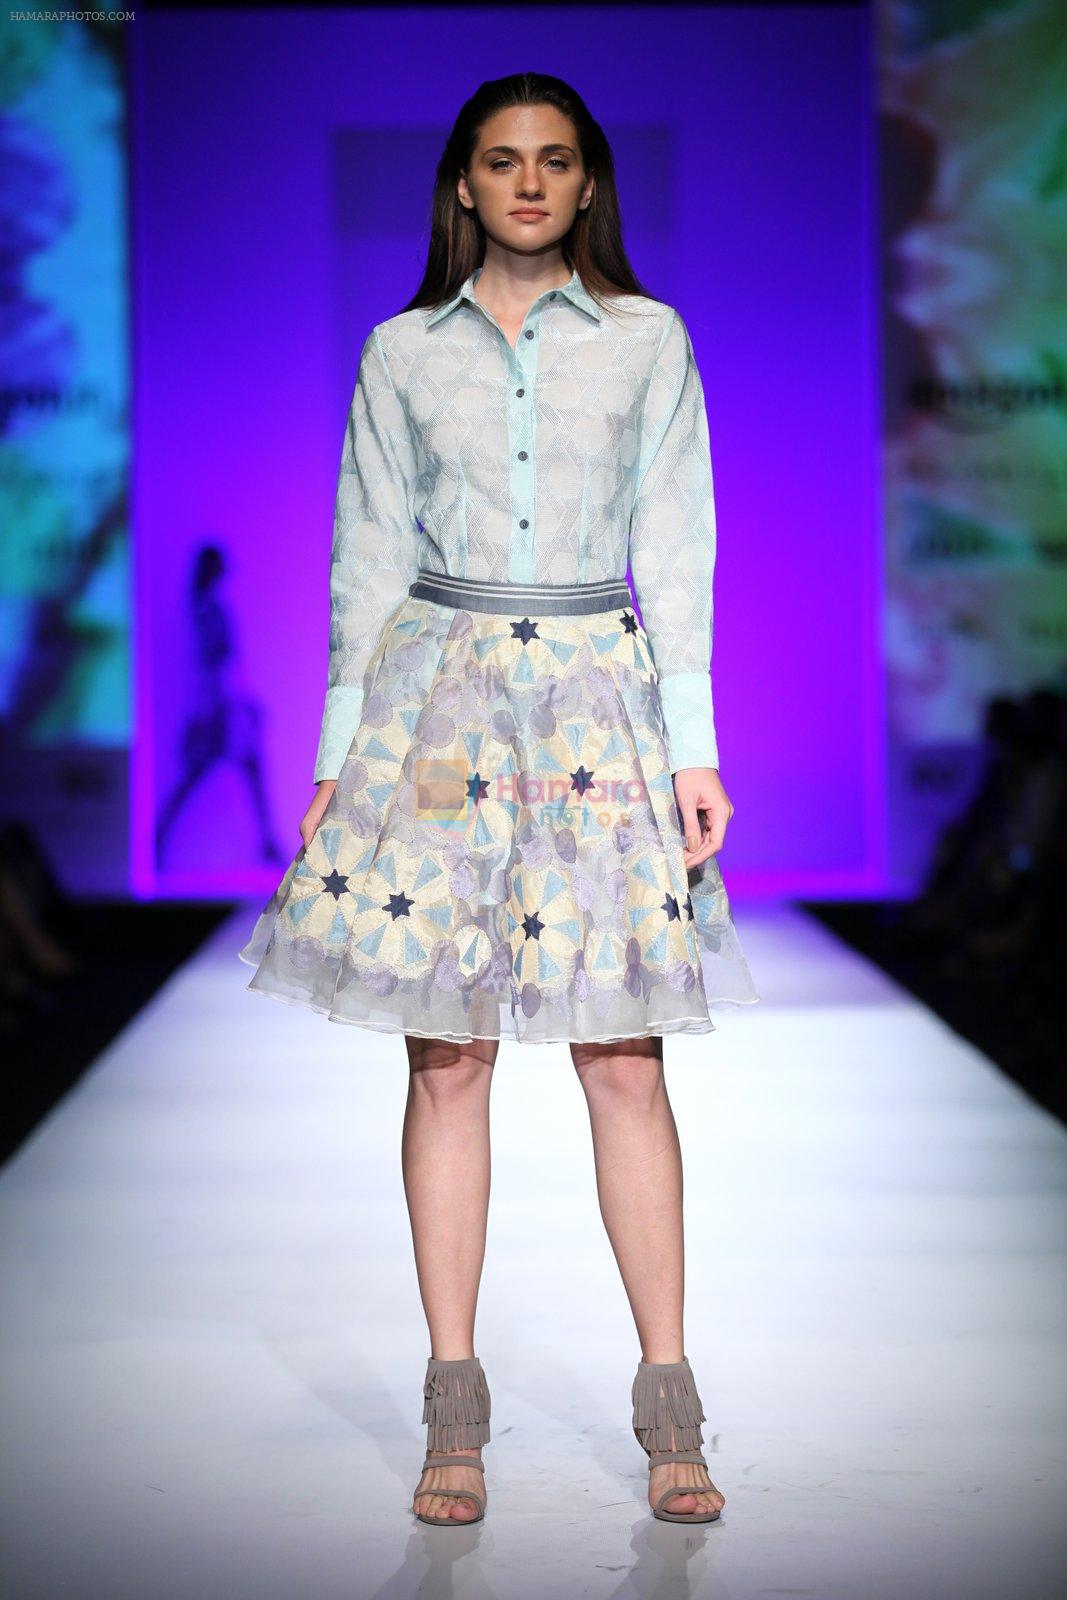 Model walk the ramp for Not so serious by Pallavi Mohan show on day 2 of Amazon india fashion week on 8th Oct 2015